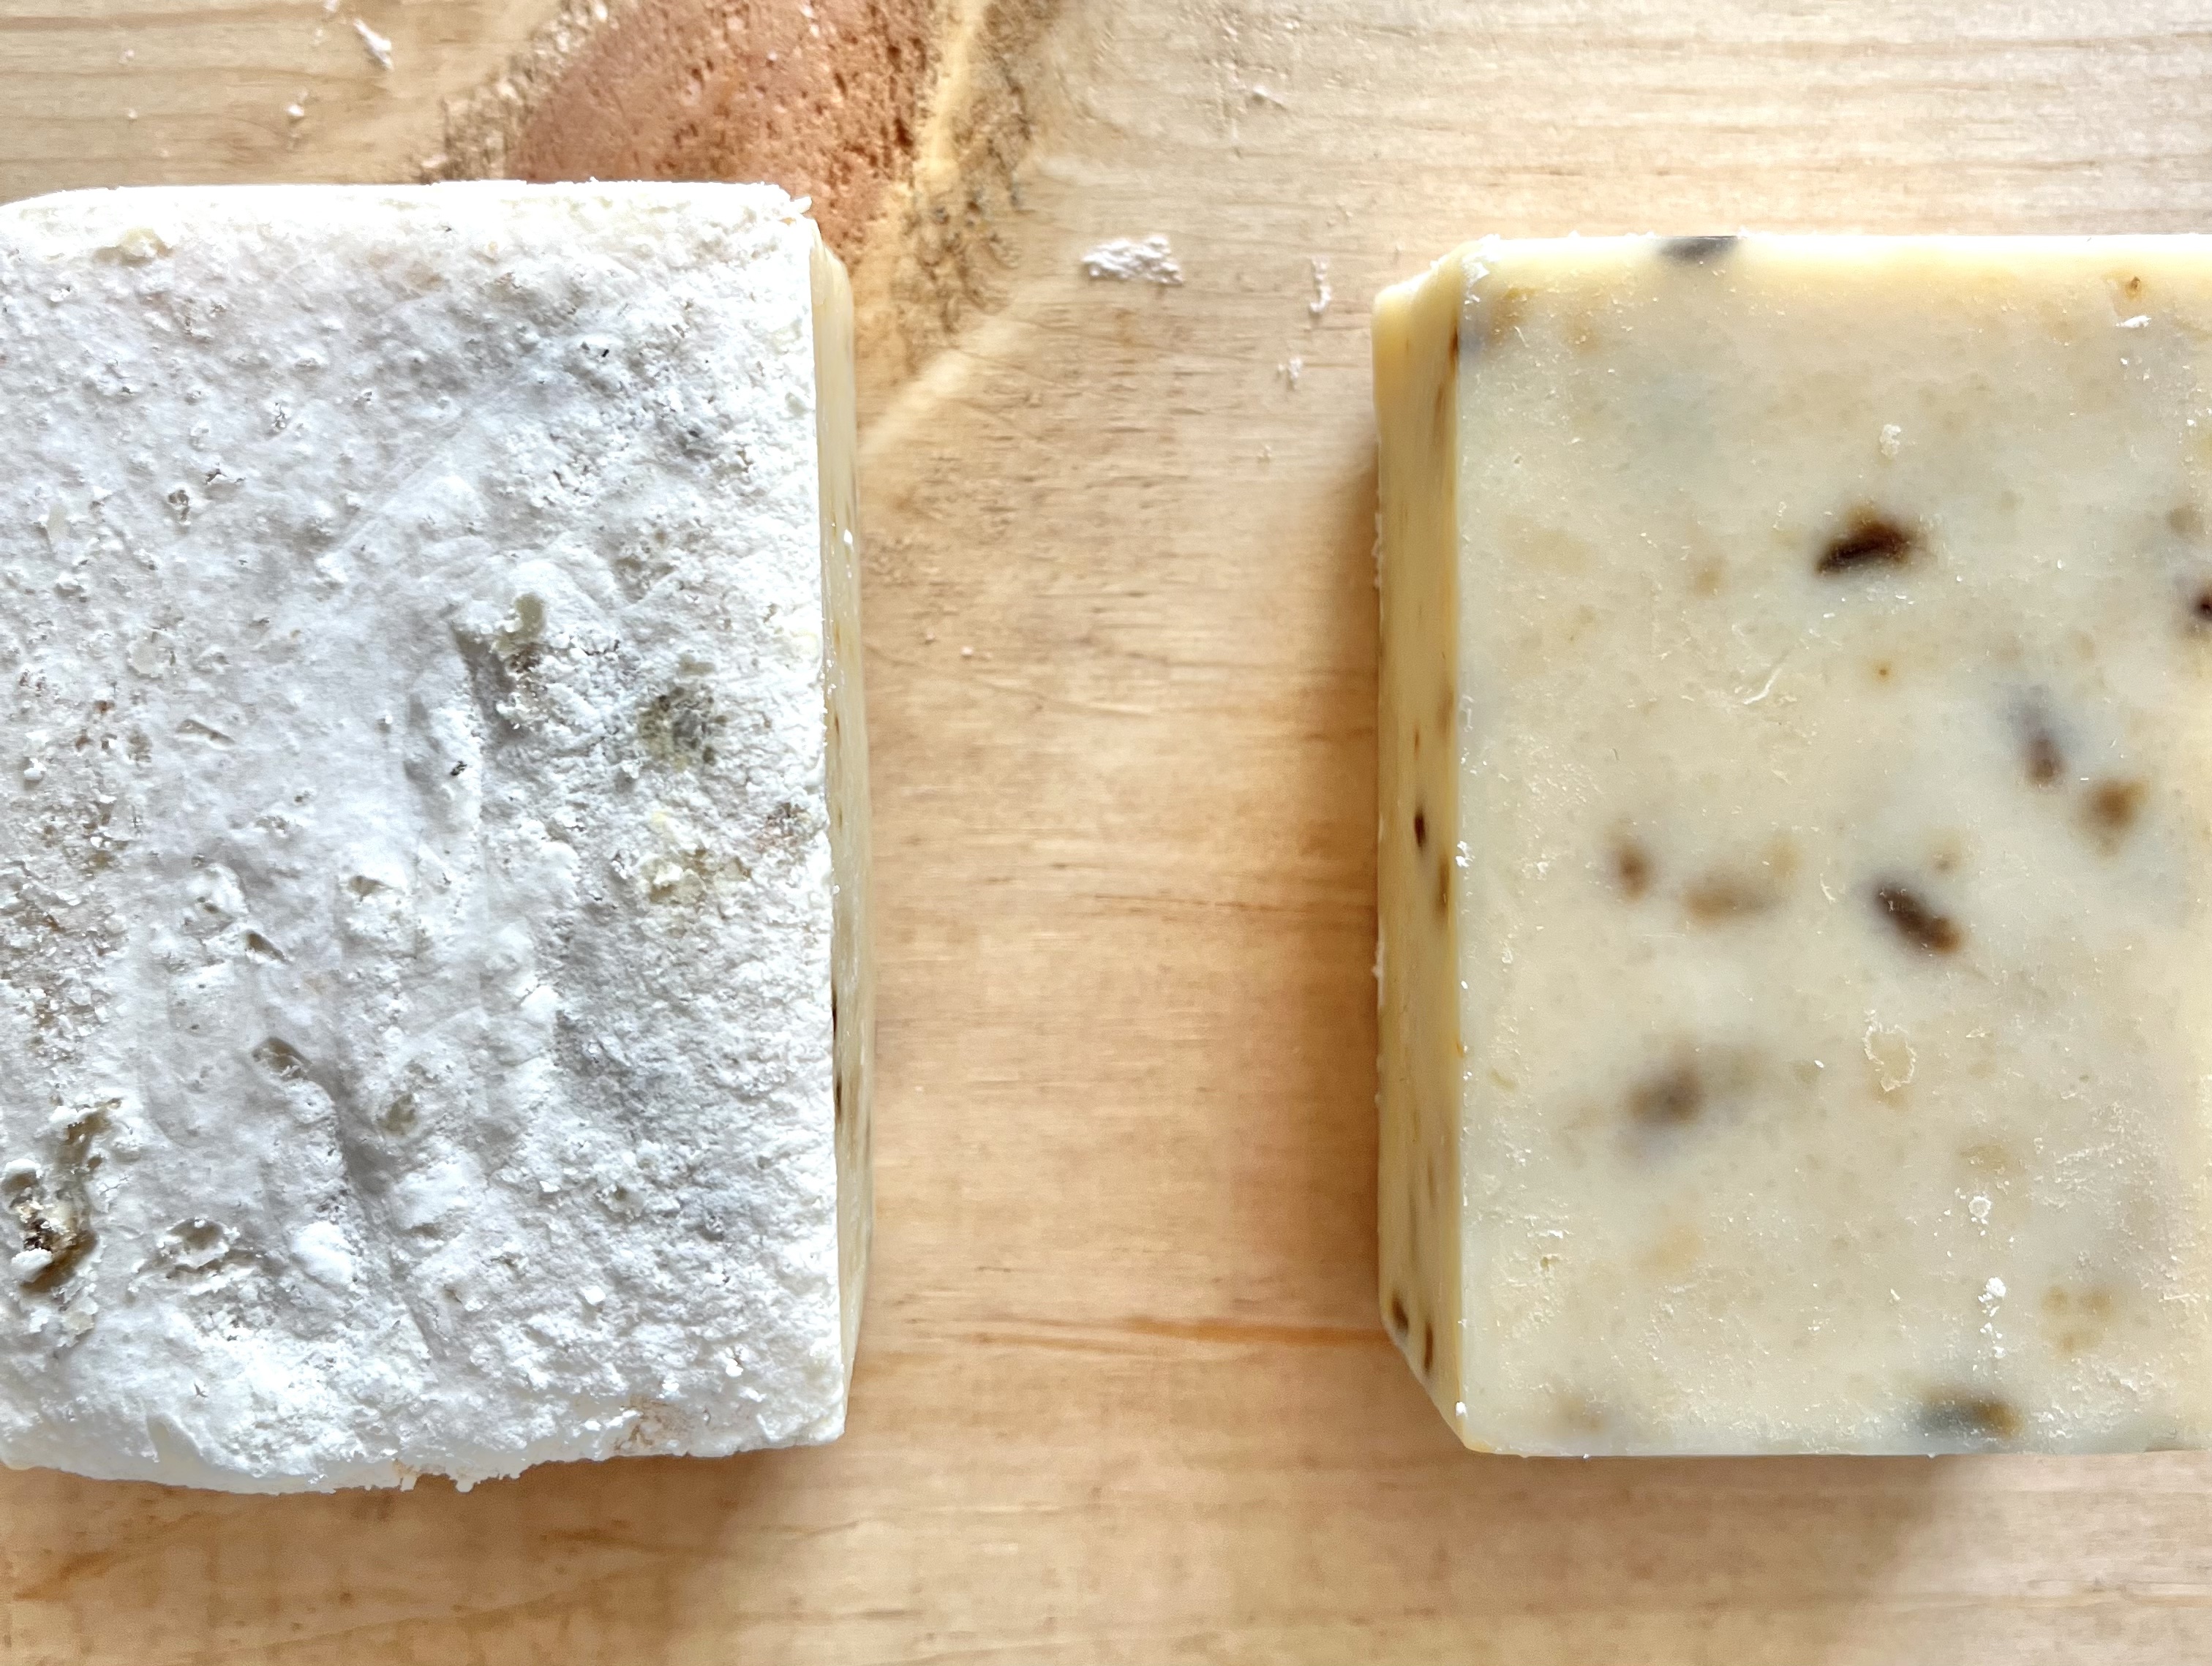 soda ash on one bar of soap, none on the other one